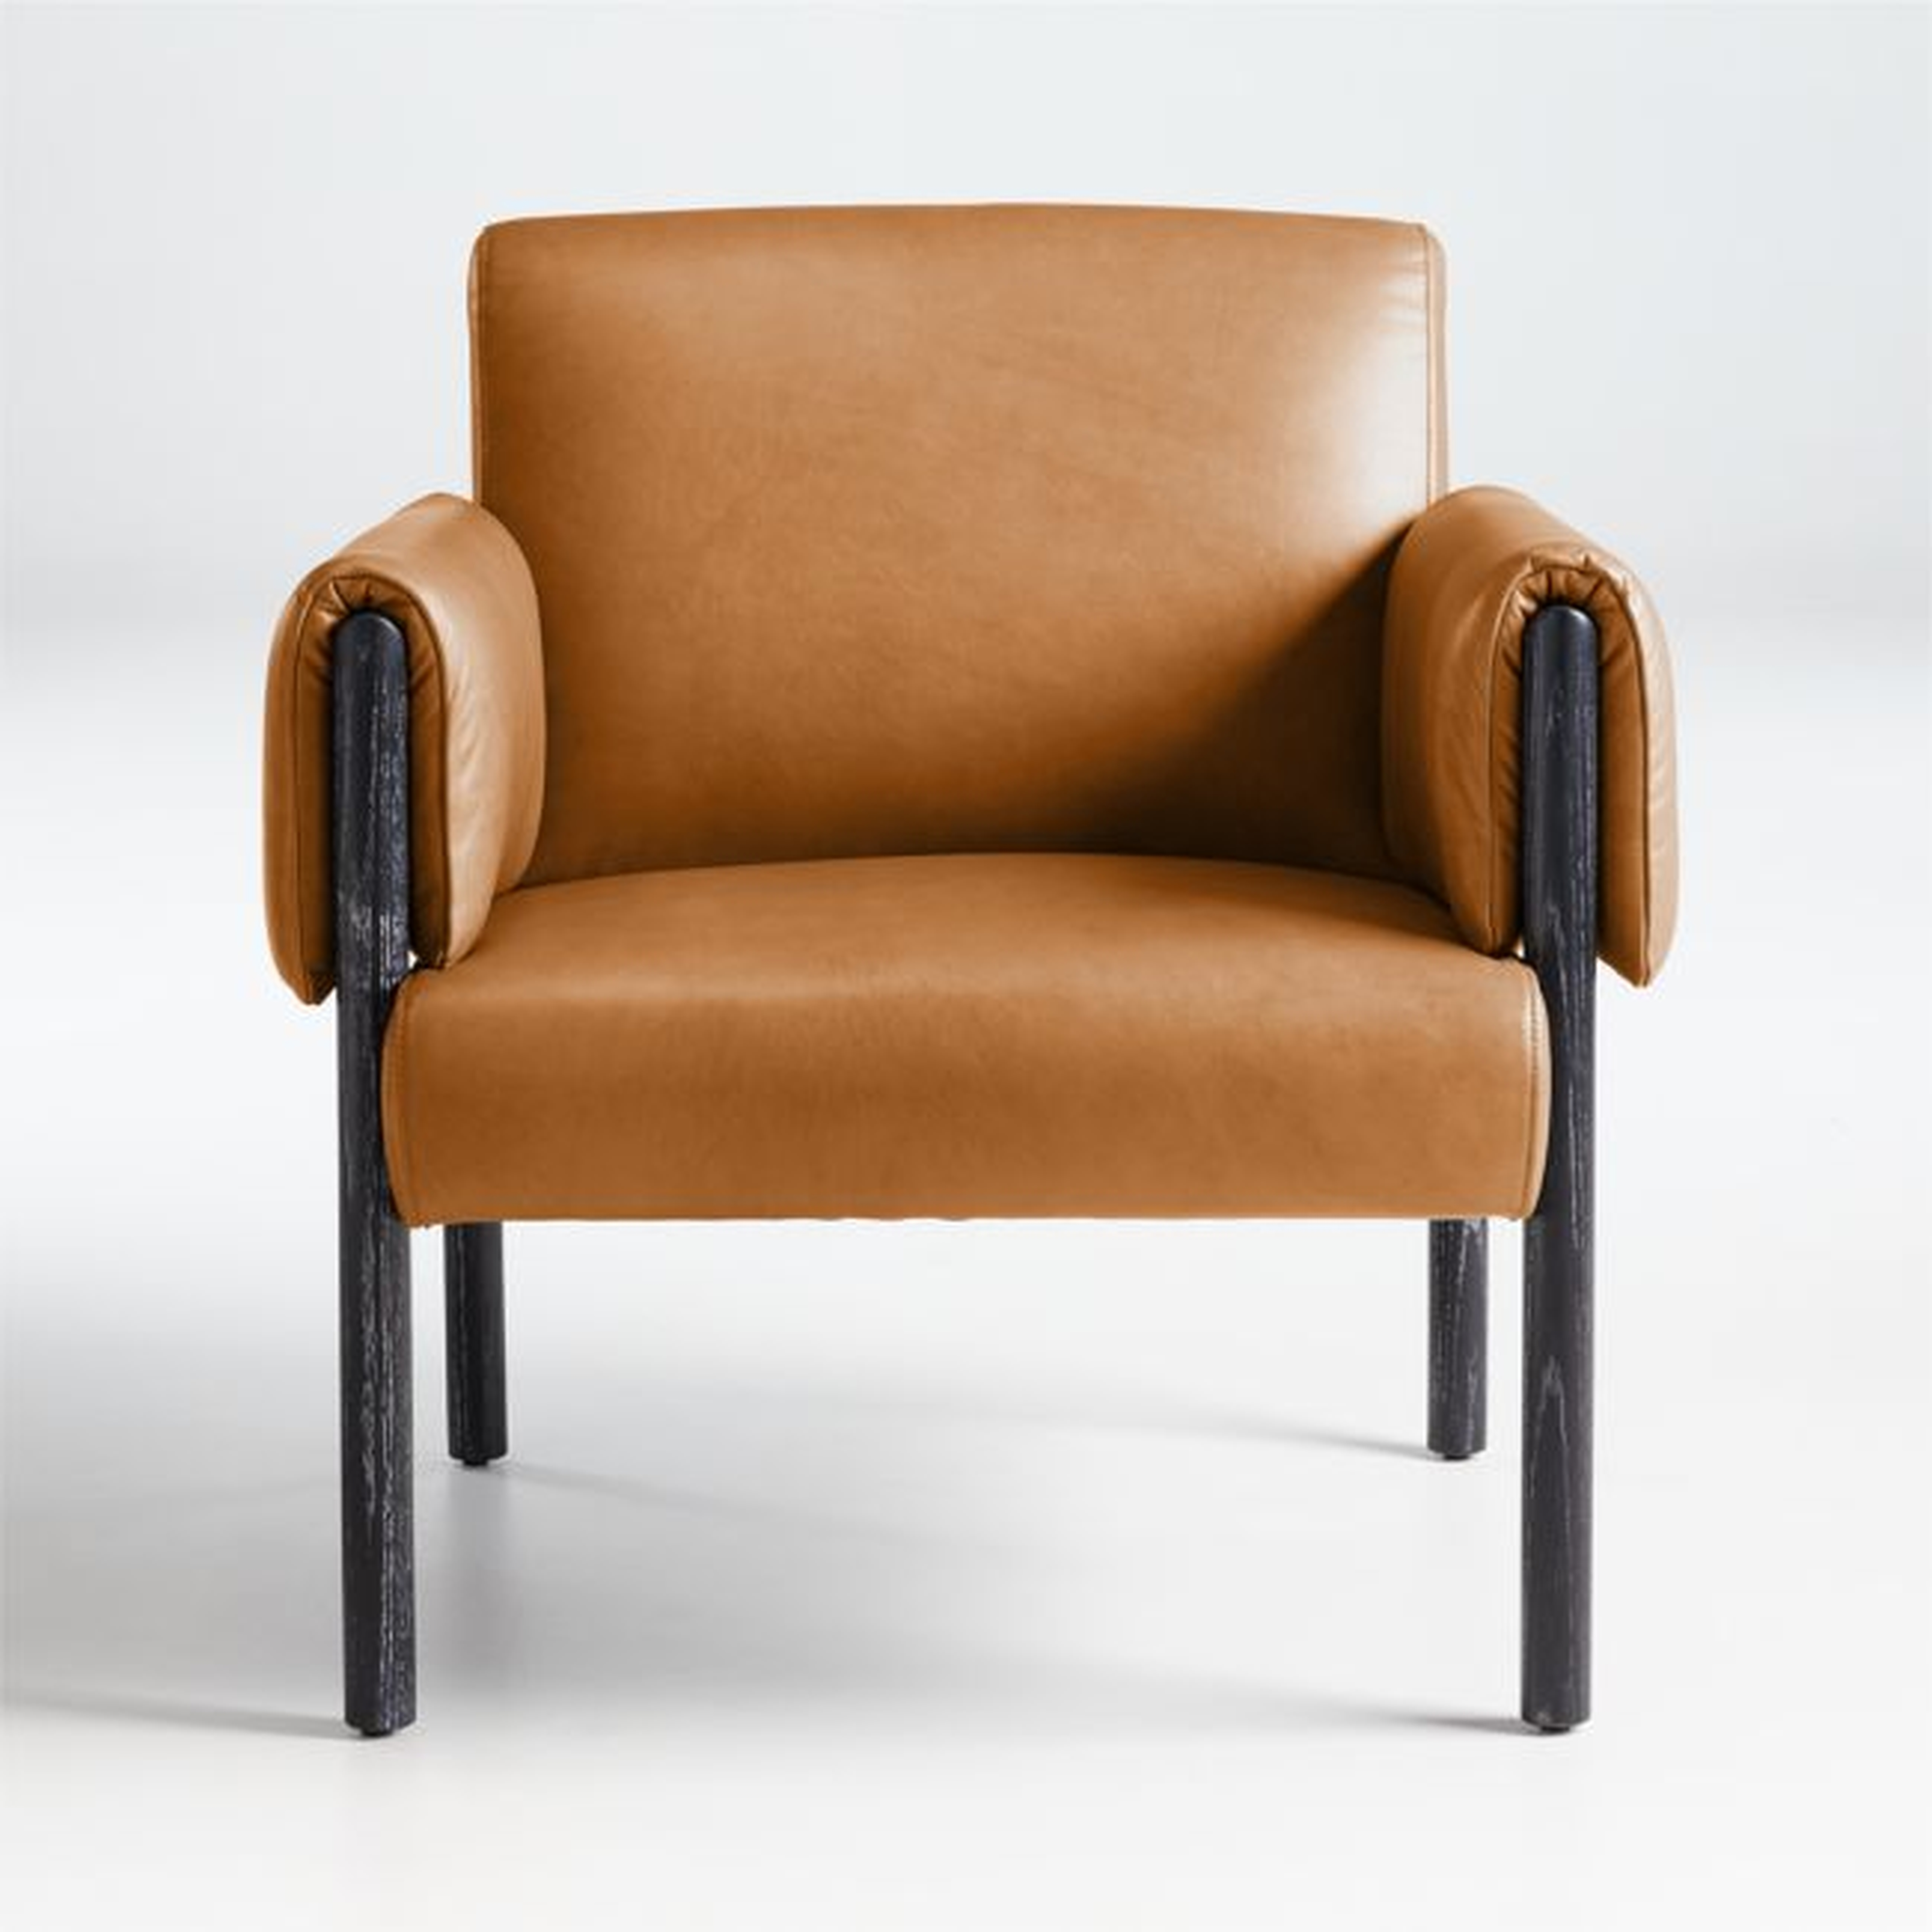 Diderot Wood & Leather Chair - Crate and Barrel